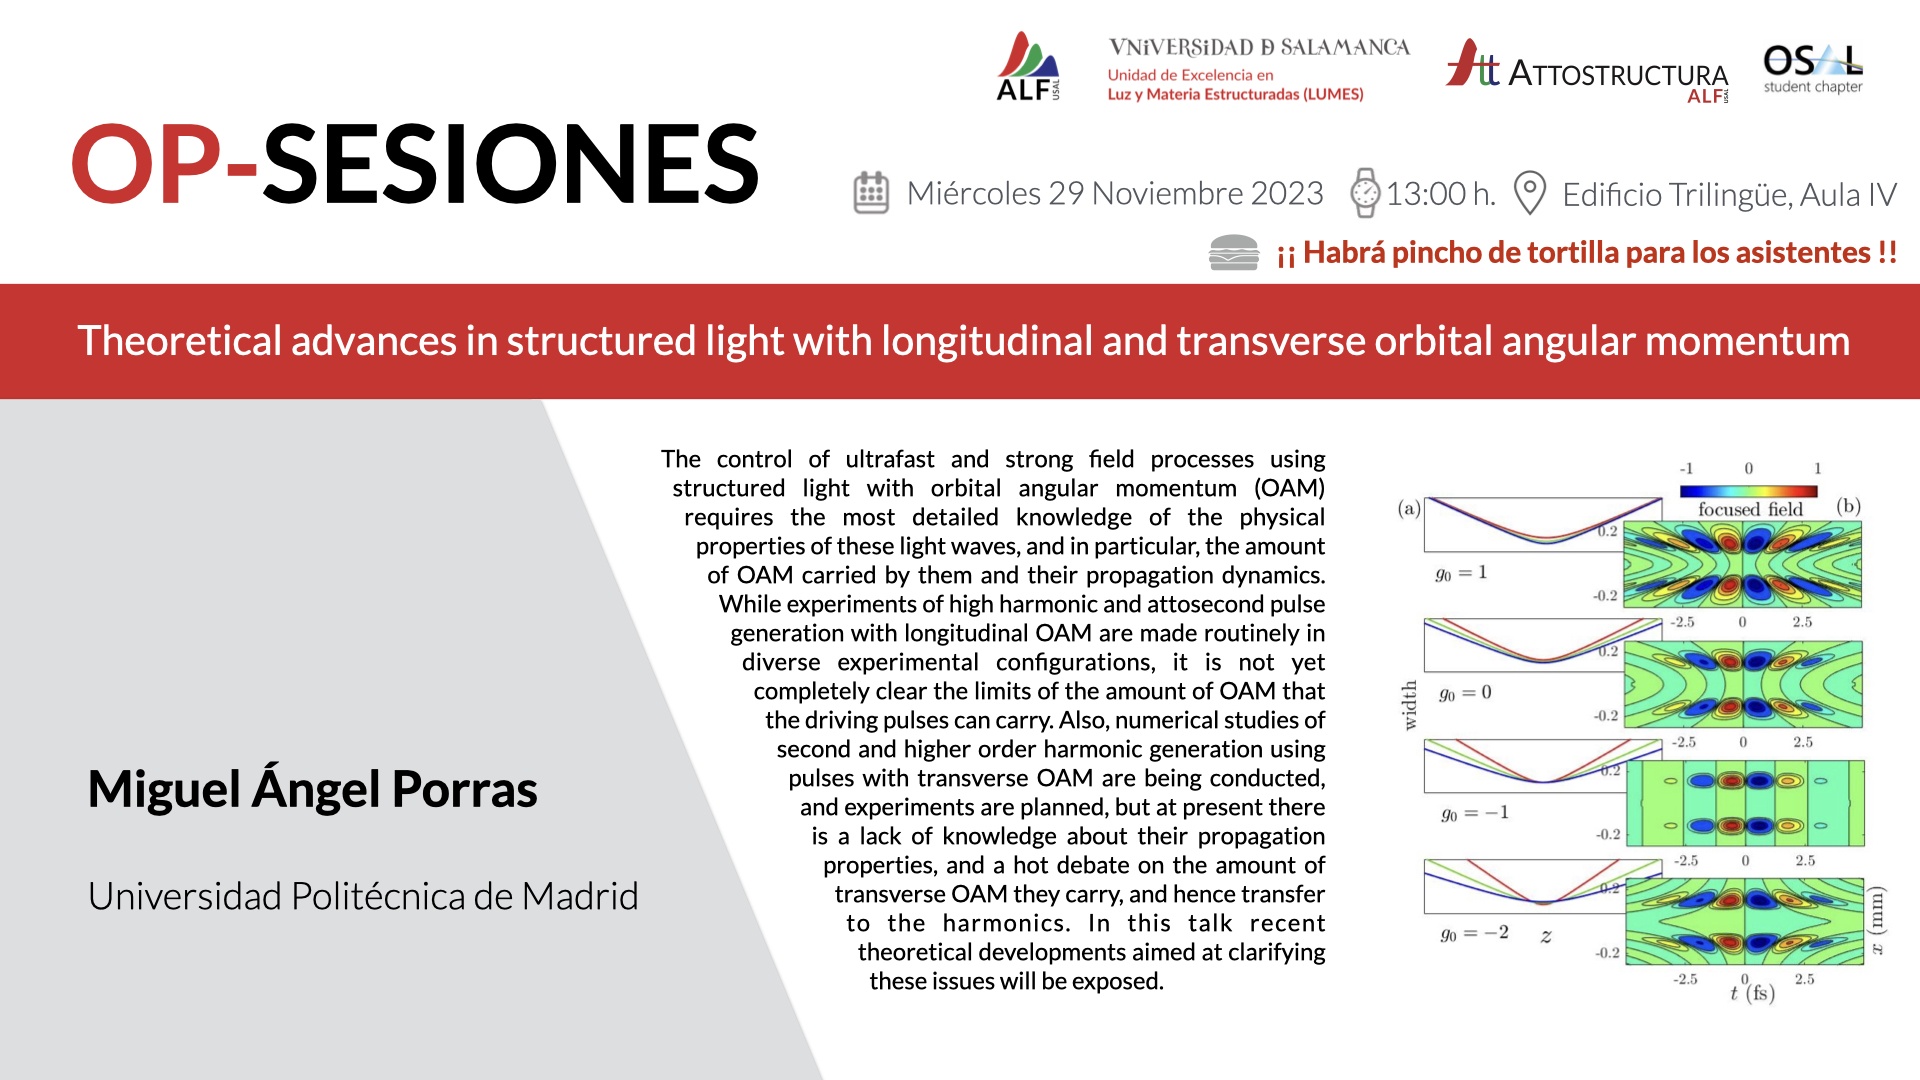 OP Session – Theoretical advances in structured light with longitudinal and transverse orbital angular momentum